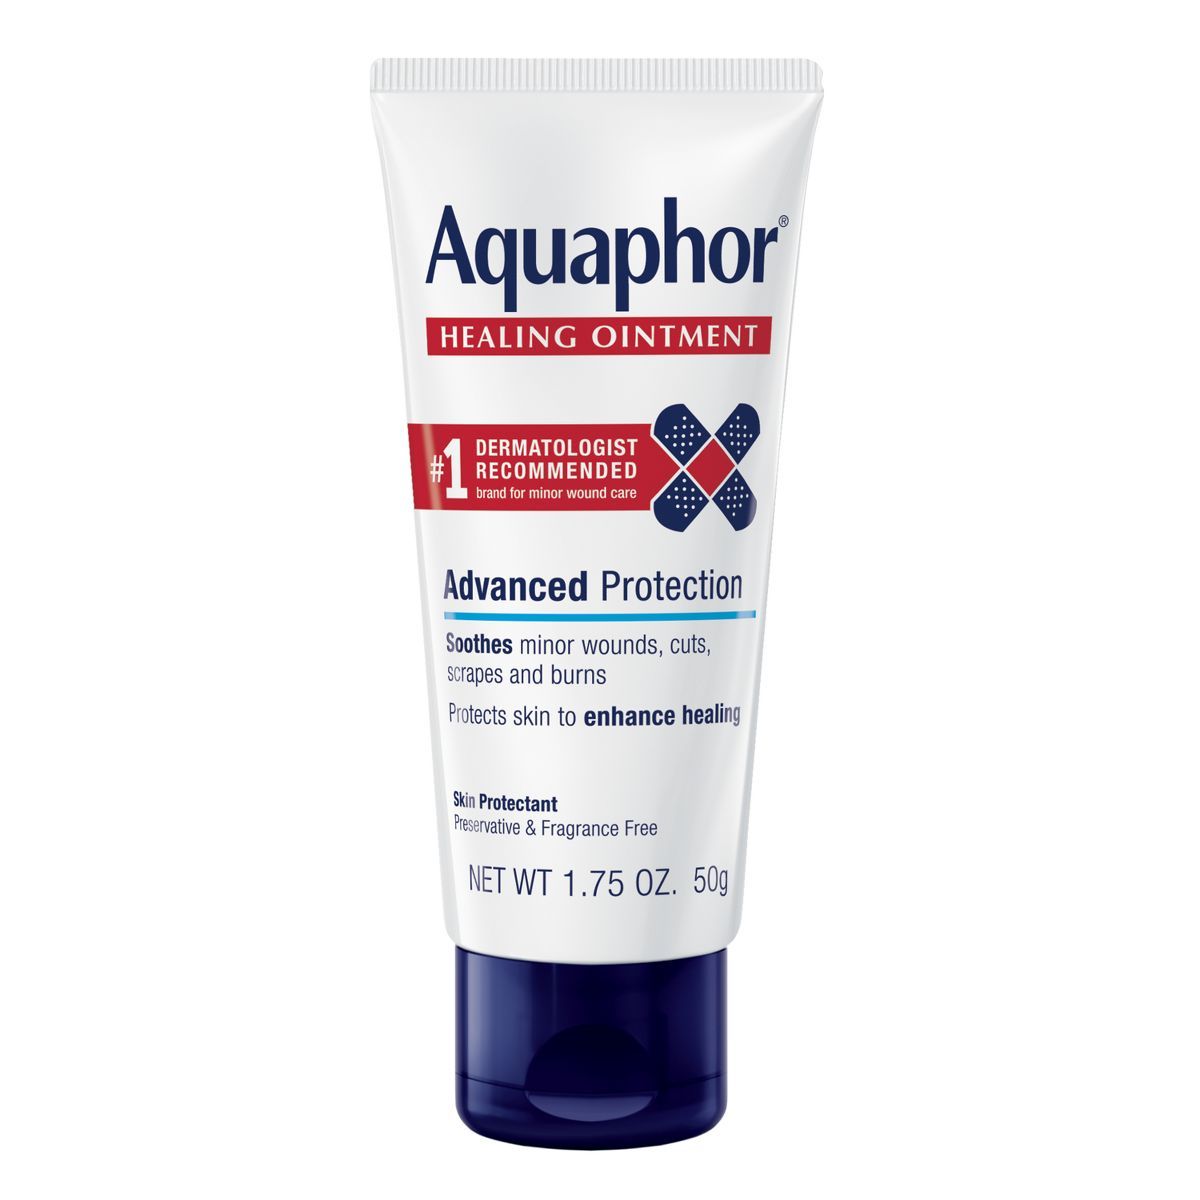 Aquaphor Healing Ointment for Dry, Cracked or Irritated Skin - 1.75oz | Target